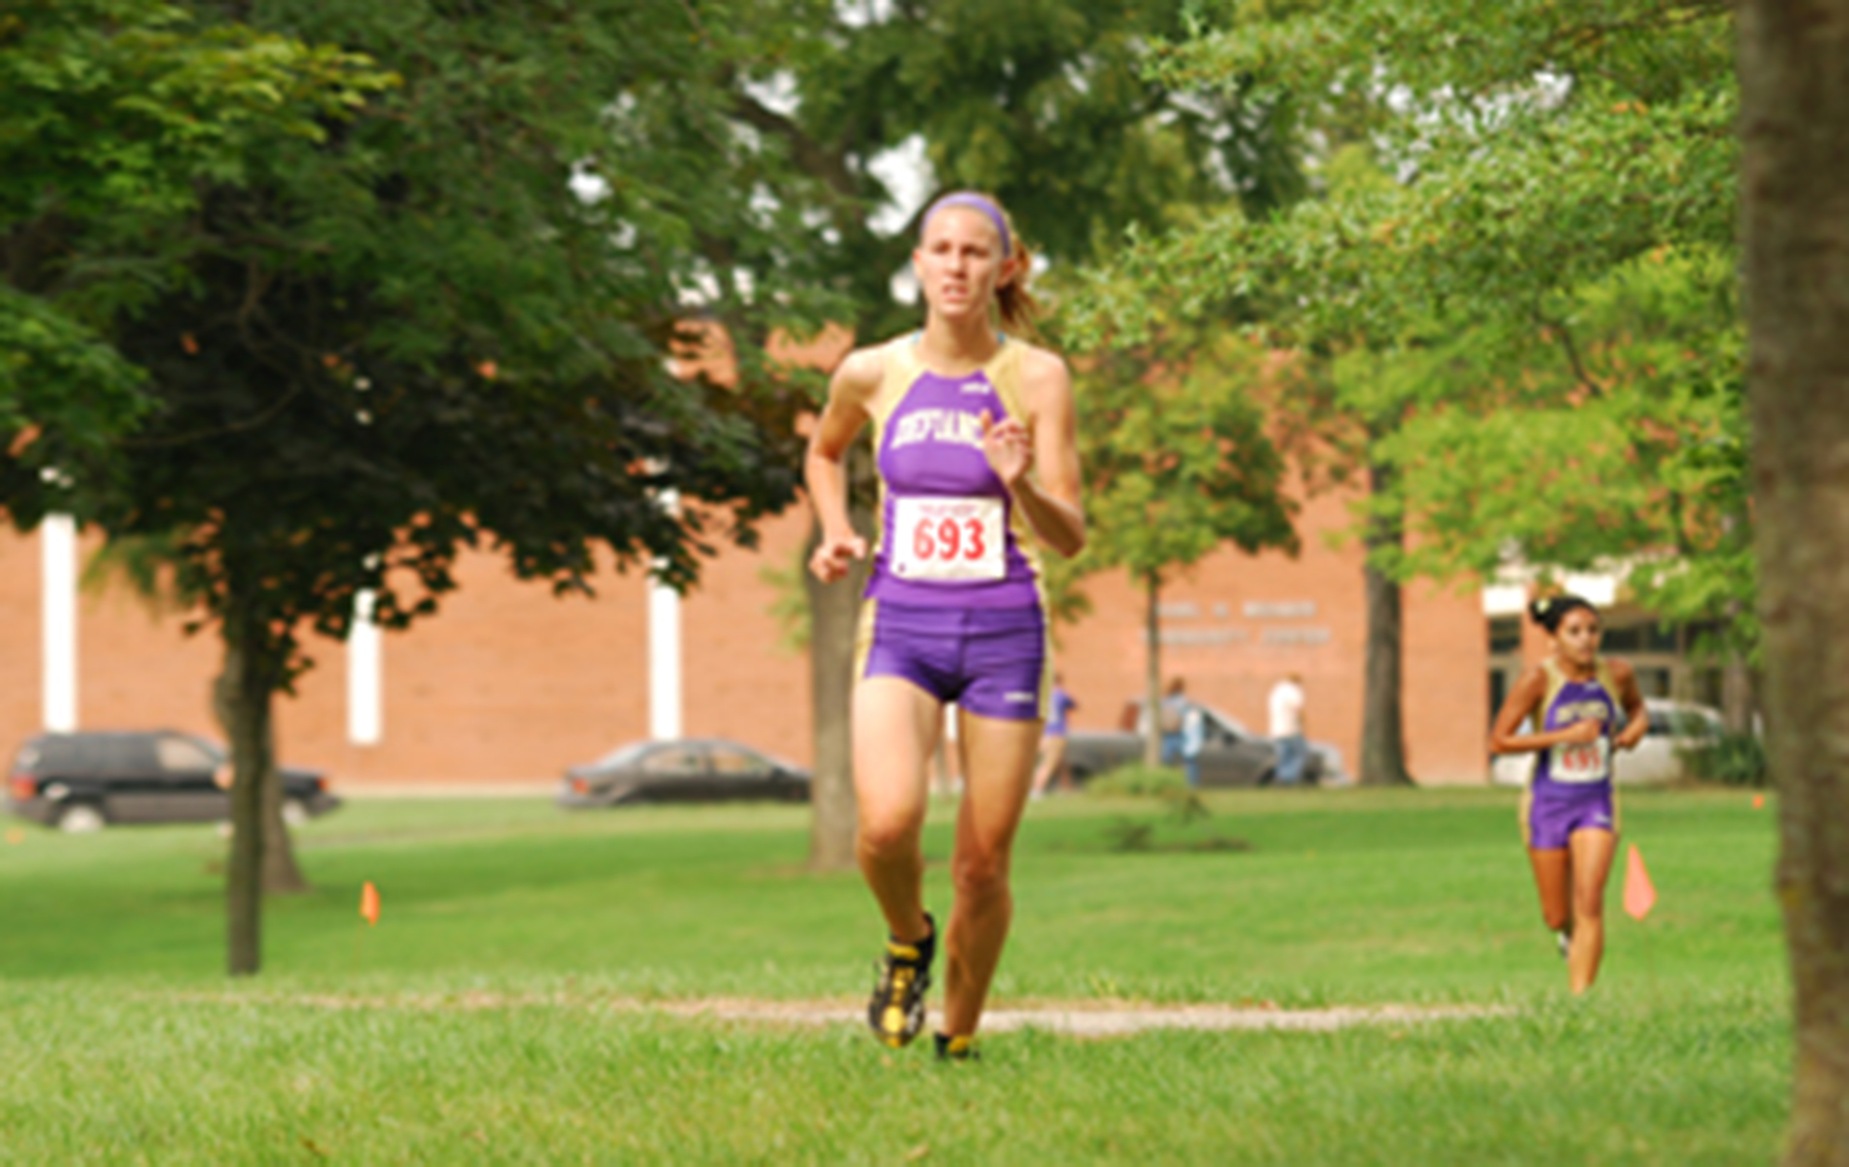 Lady Harriers Place 8th at HCAC Championships